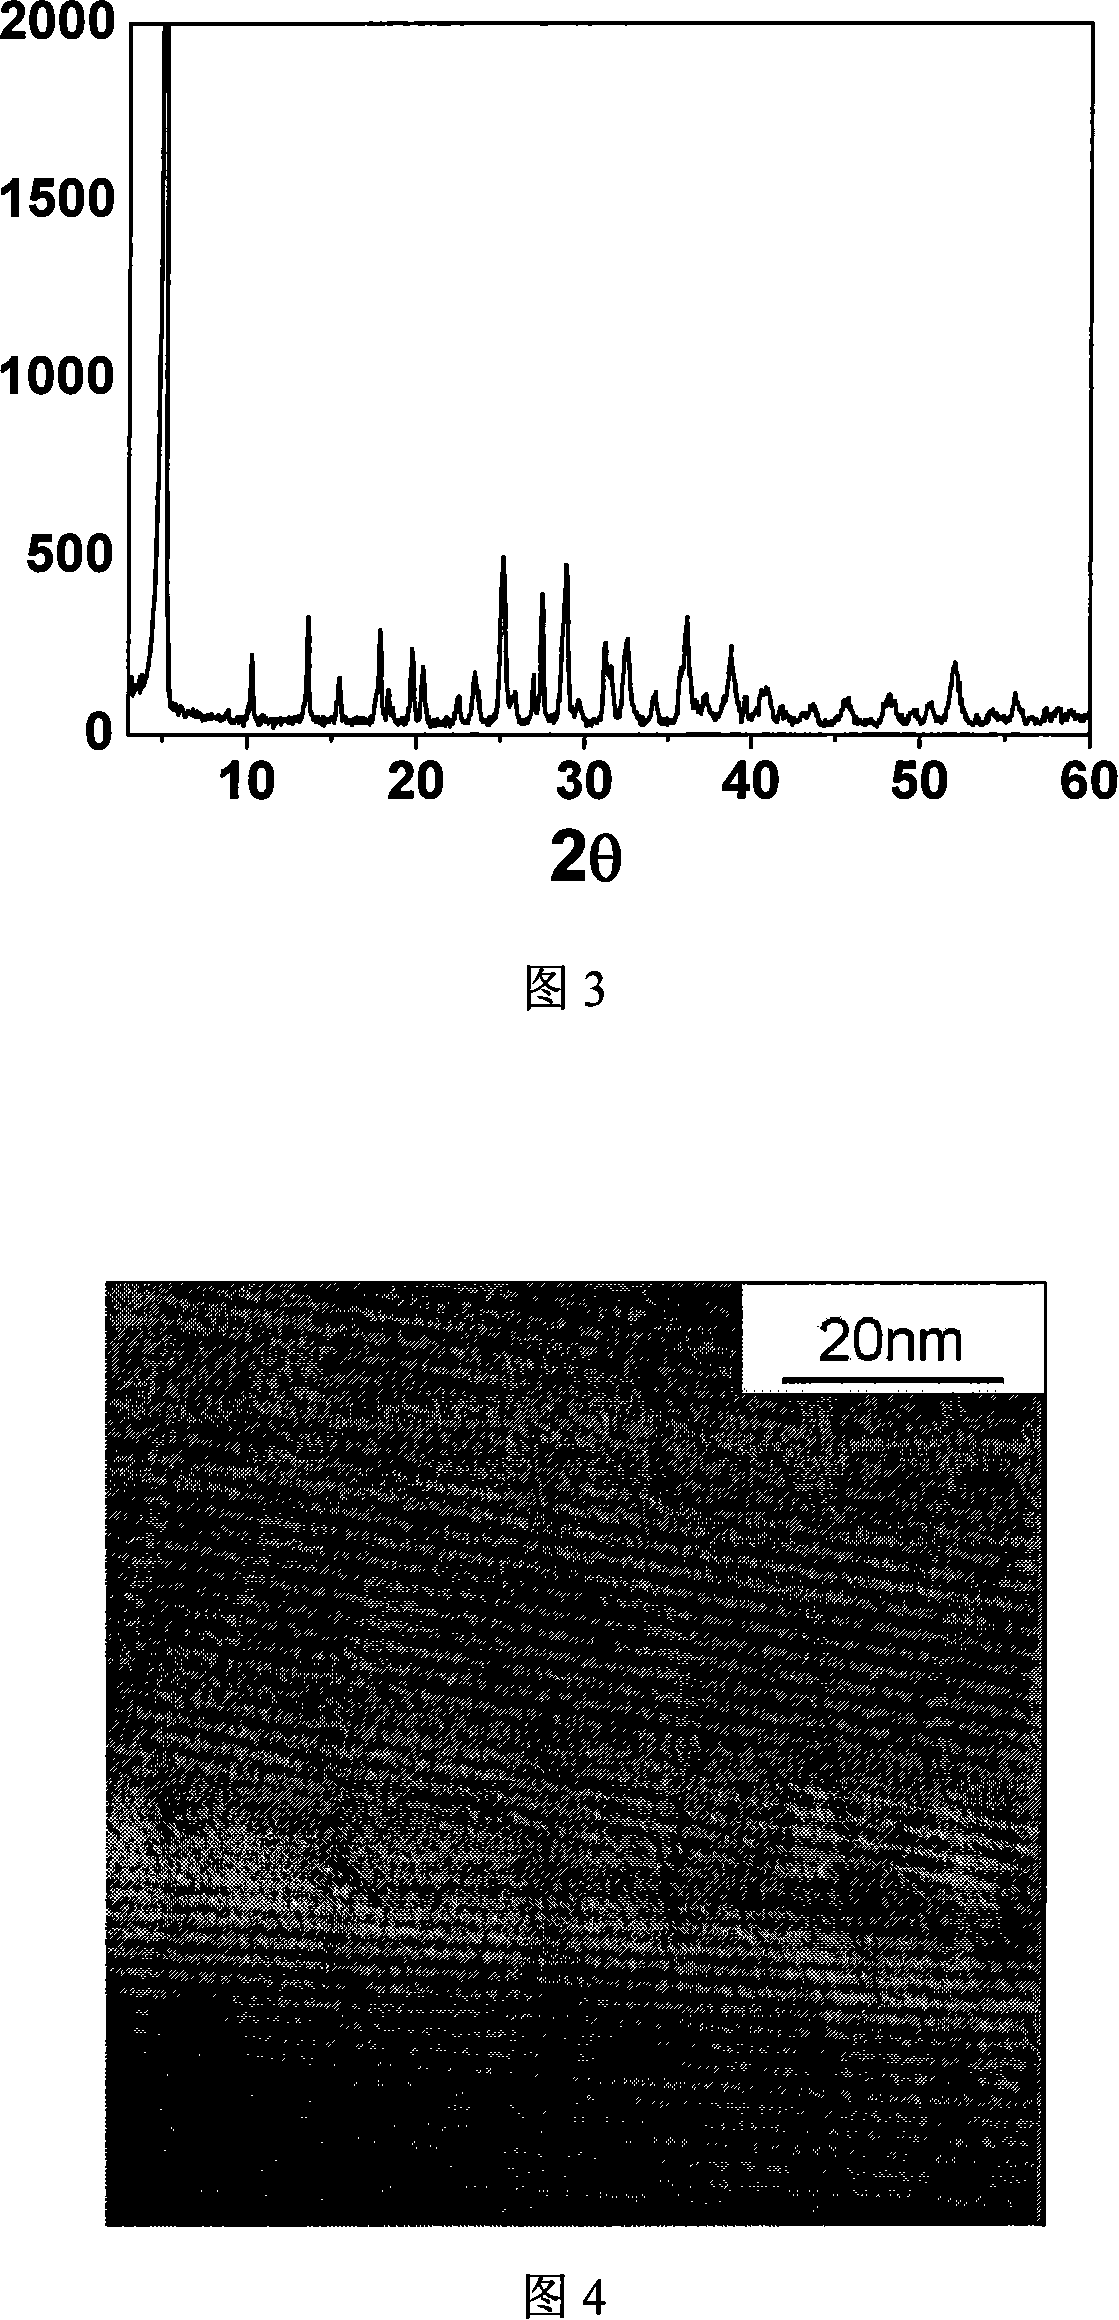 Non-bittern swelling flame-proof polypropylene containing porous nickel phosphate and preparation method thereof